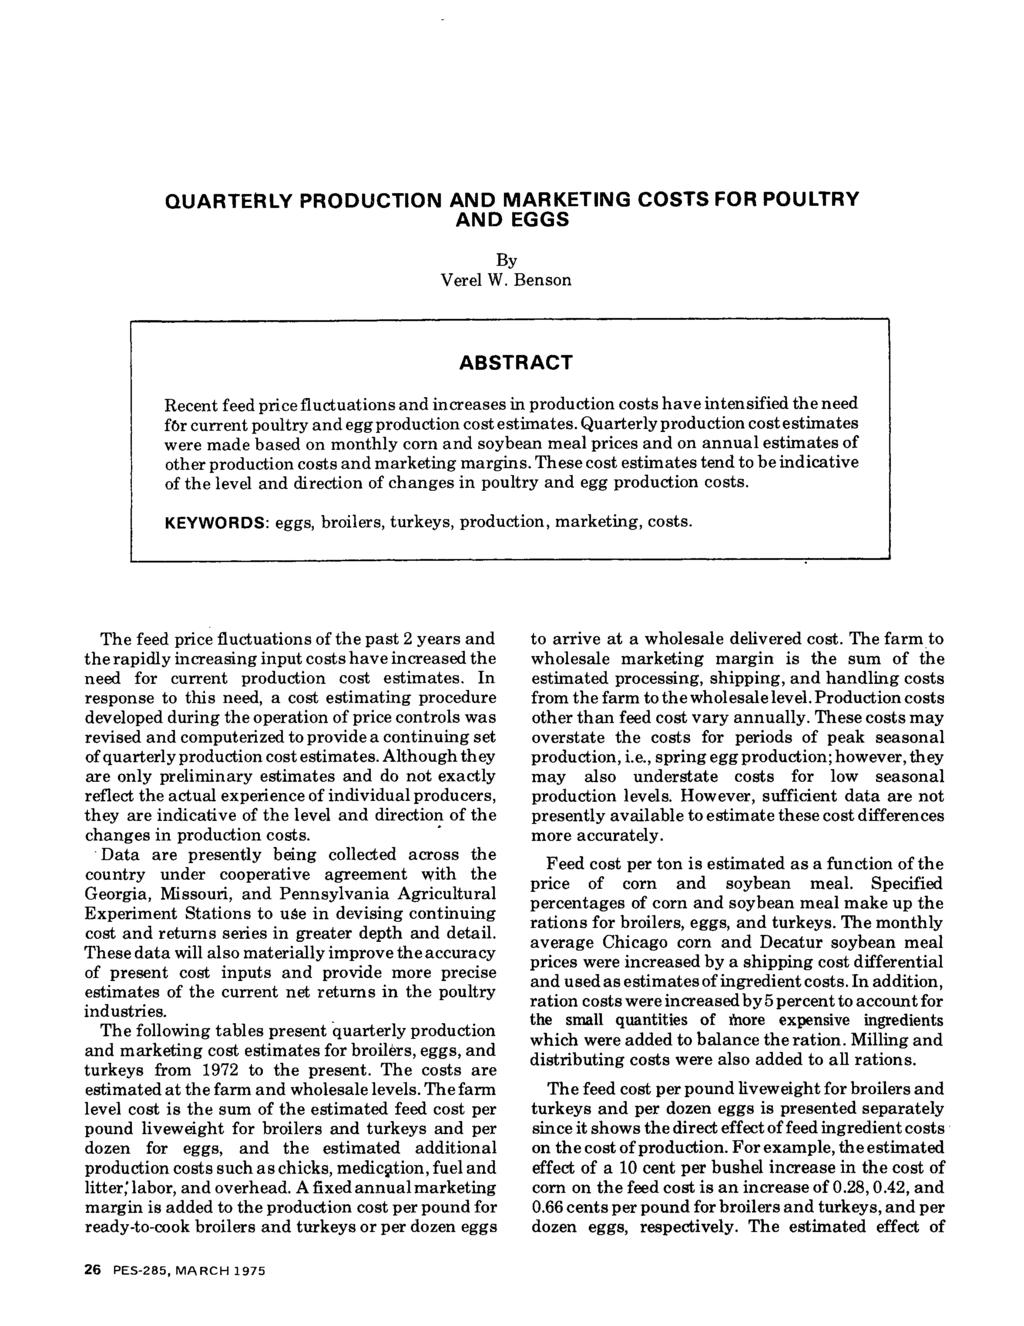 QUARTERLY PRODUCTON AND MARKETNG COSTS FOR POULTRY AND EGGS By V erel W.